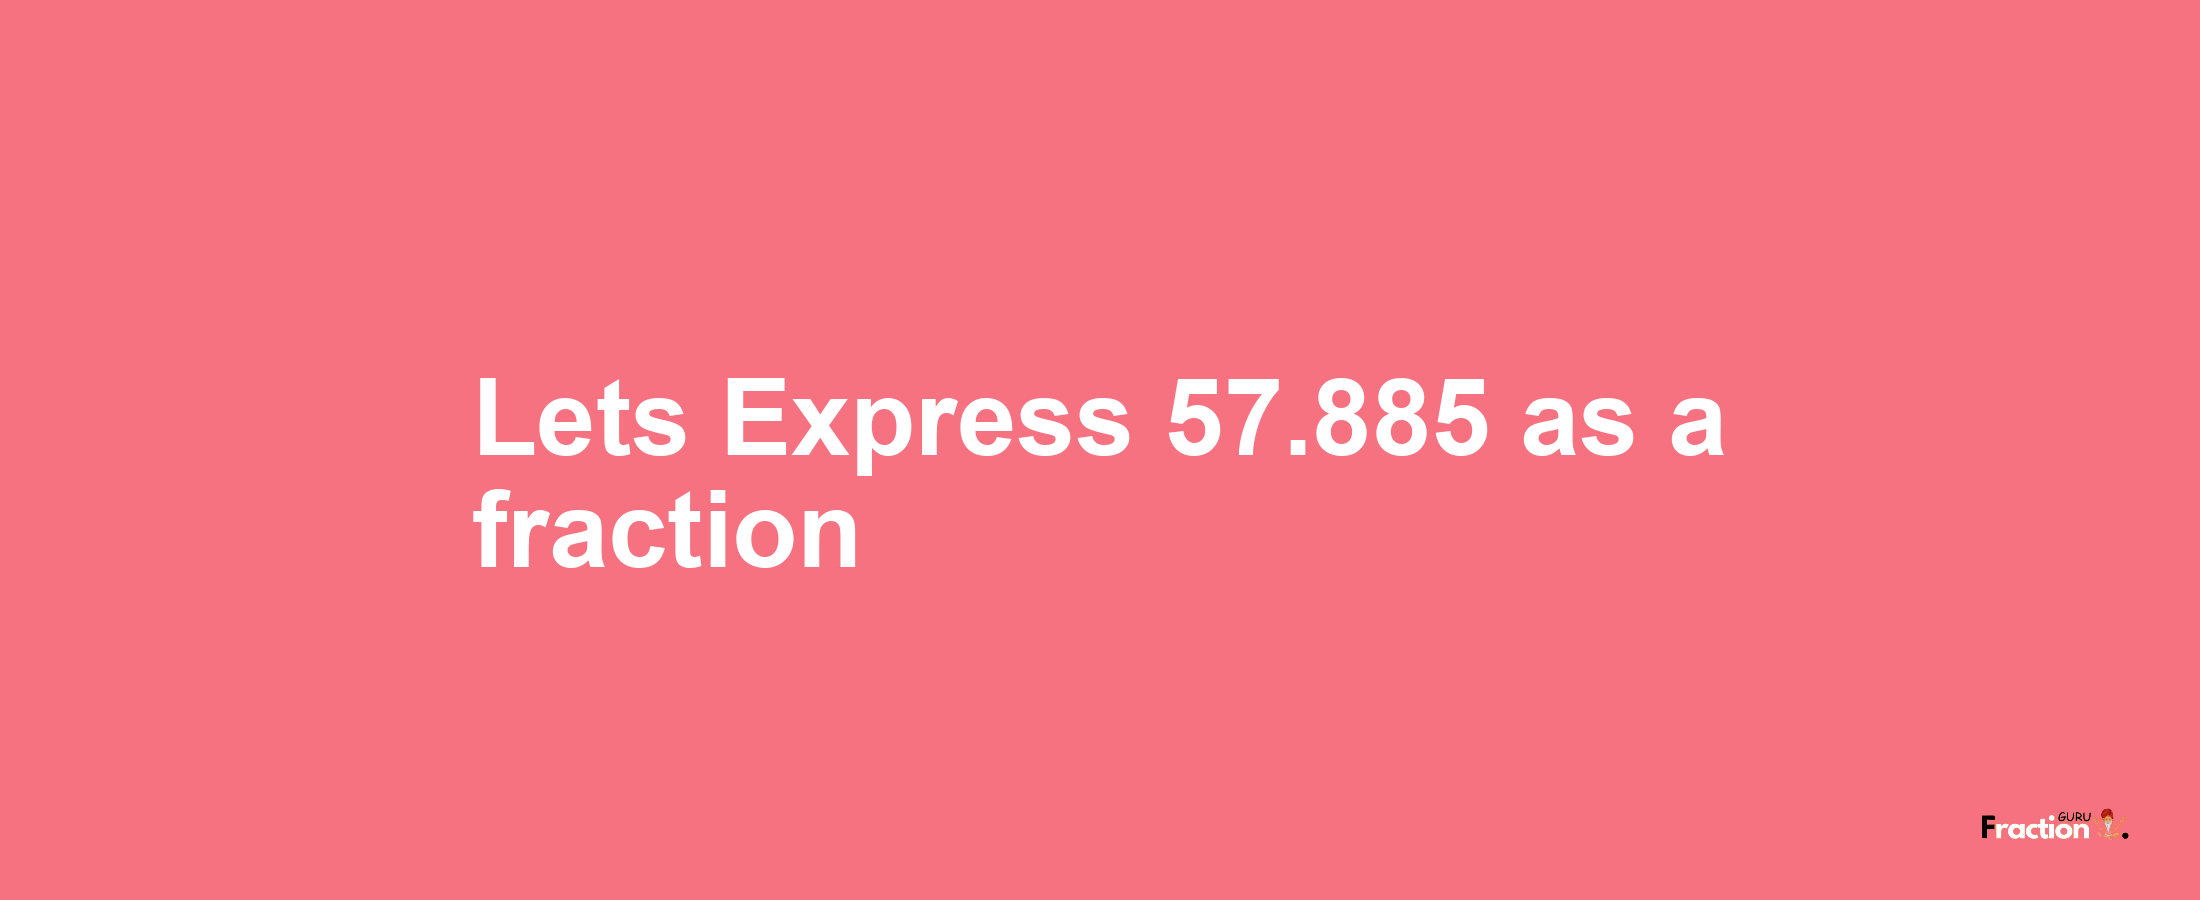 Lets Express 57.885 as afraction